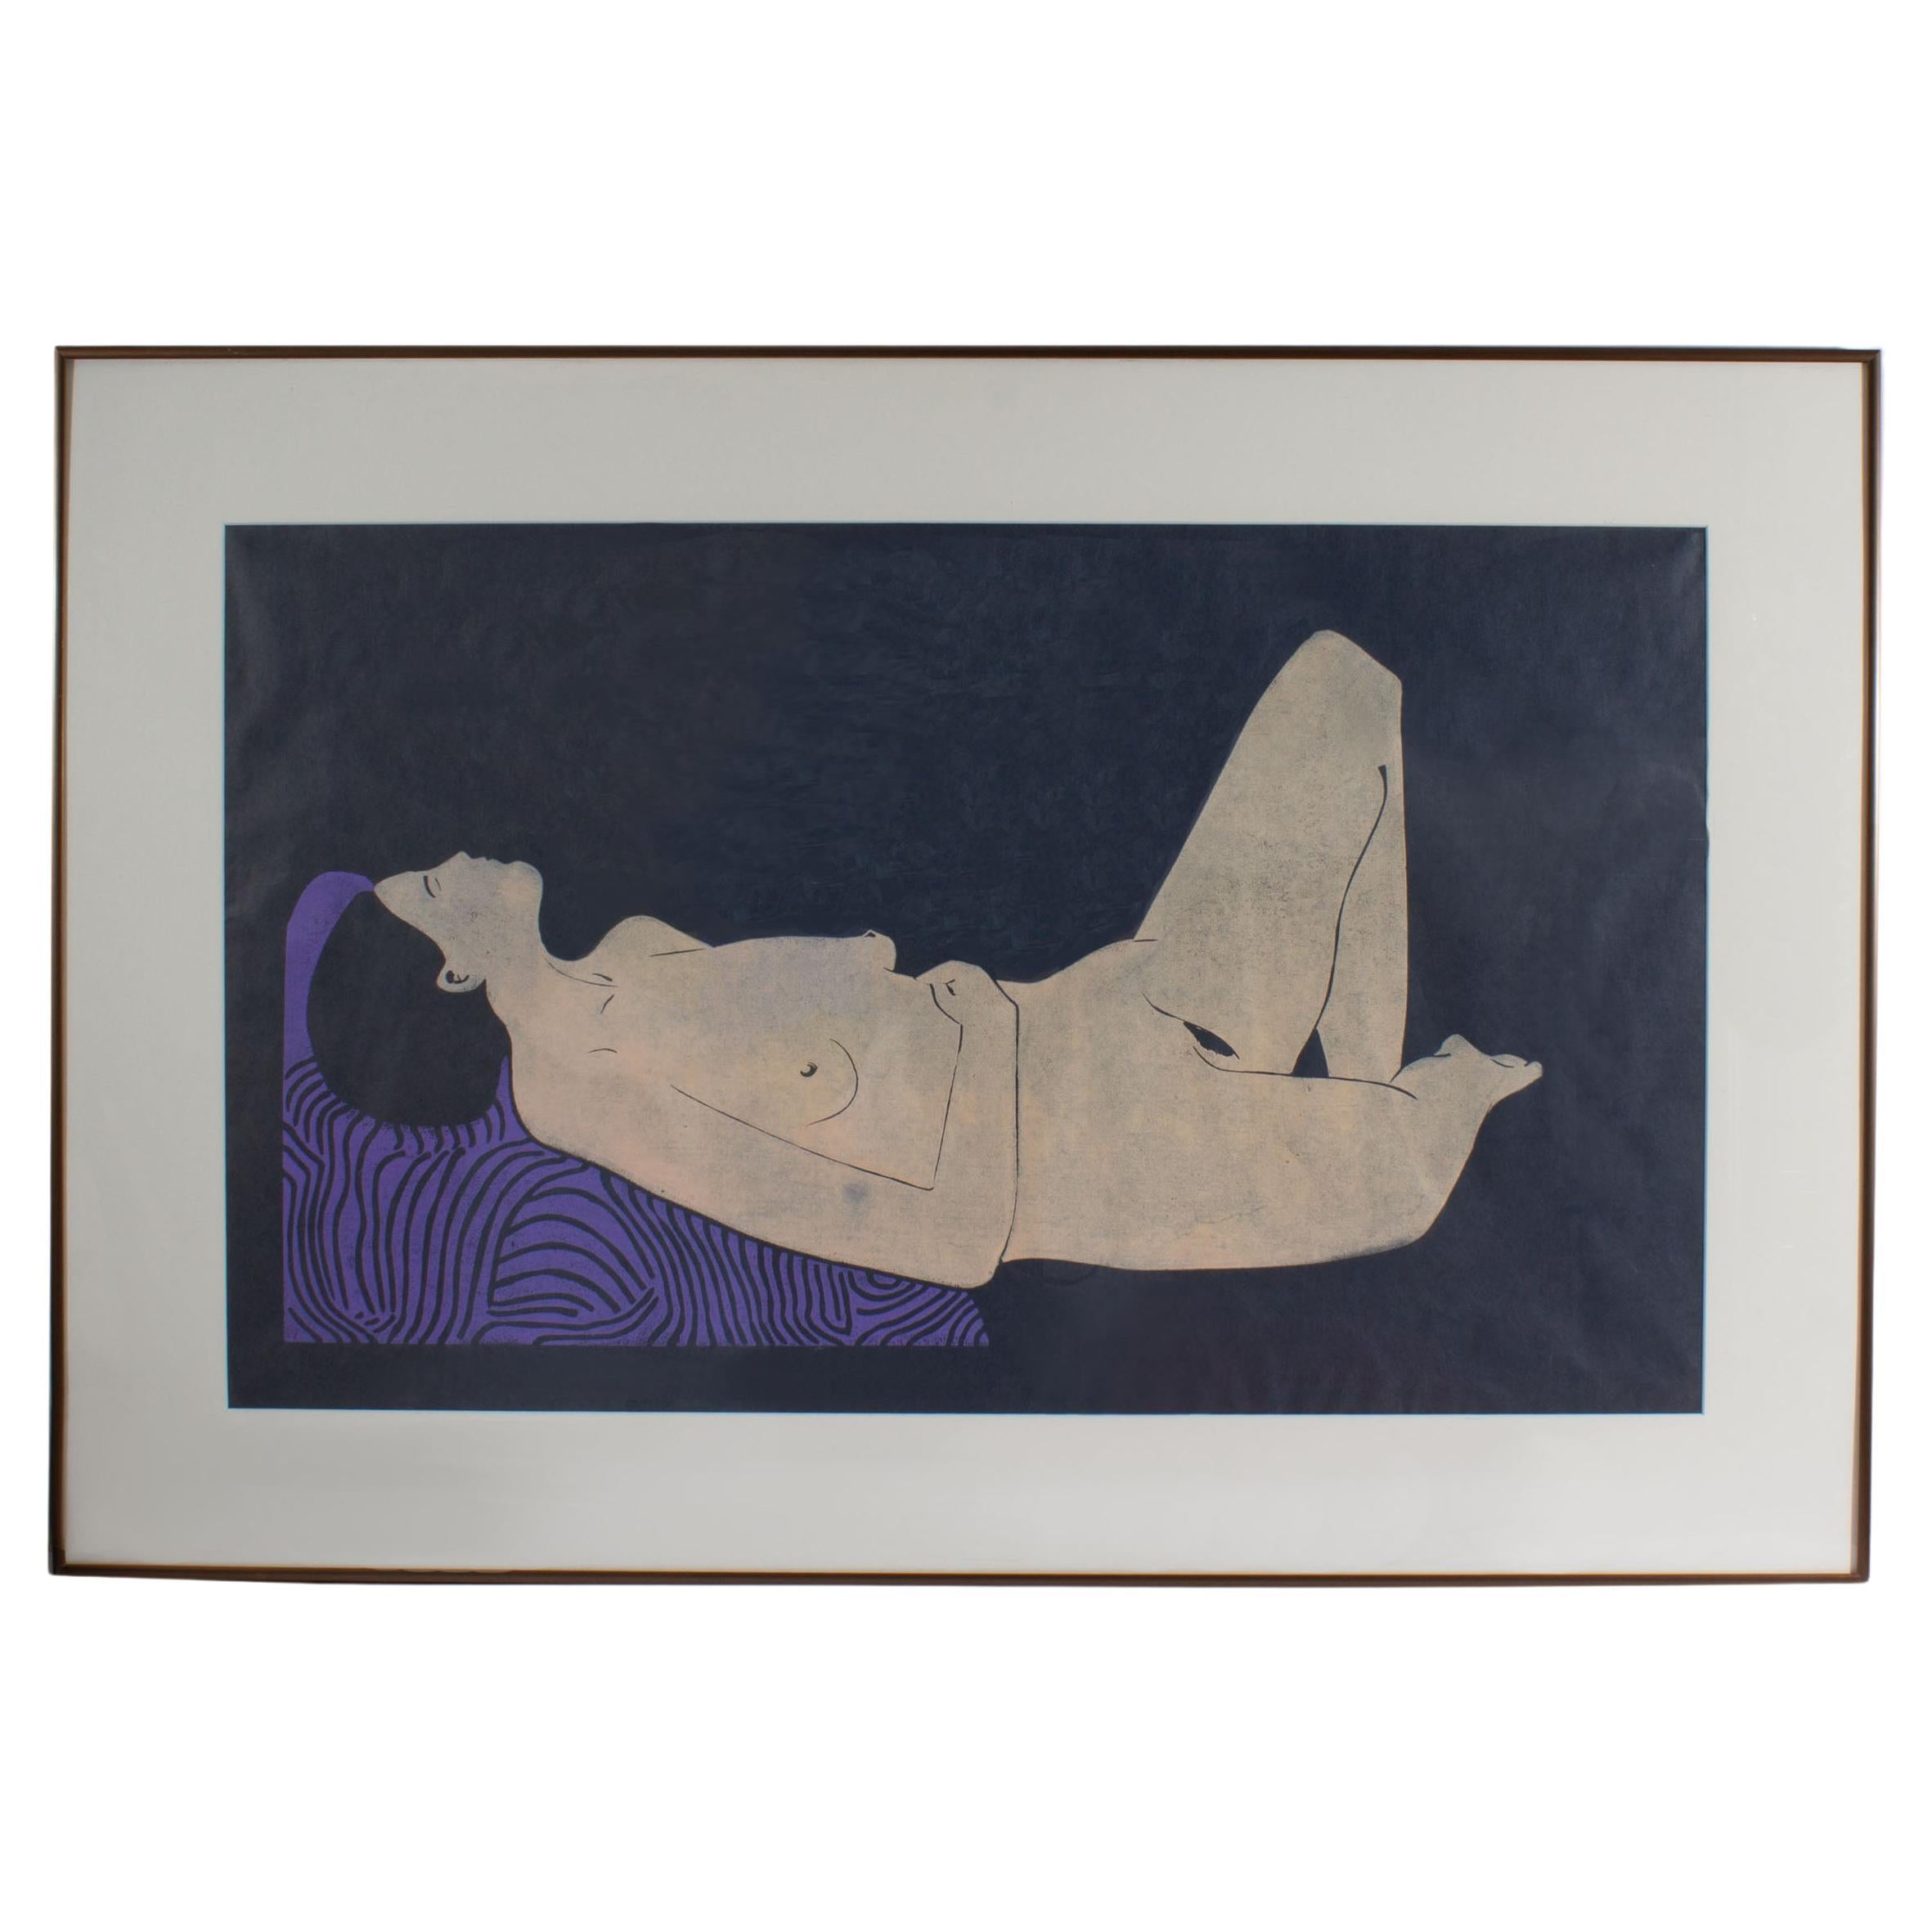 Doug DeLind Signed “Nude” Limited Edition Relief Print For Sale